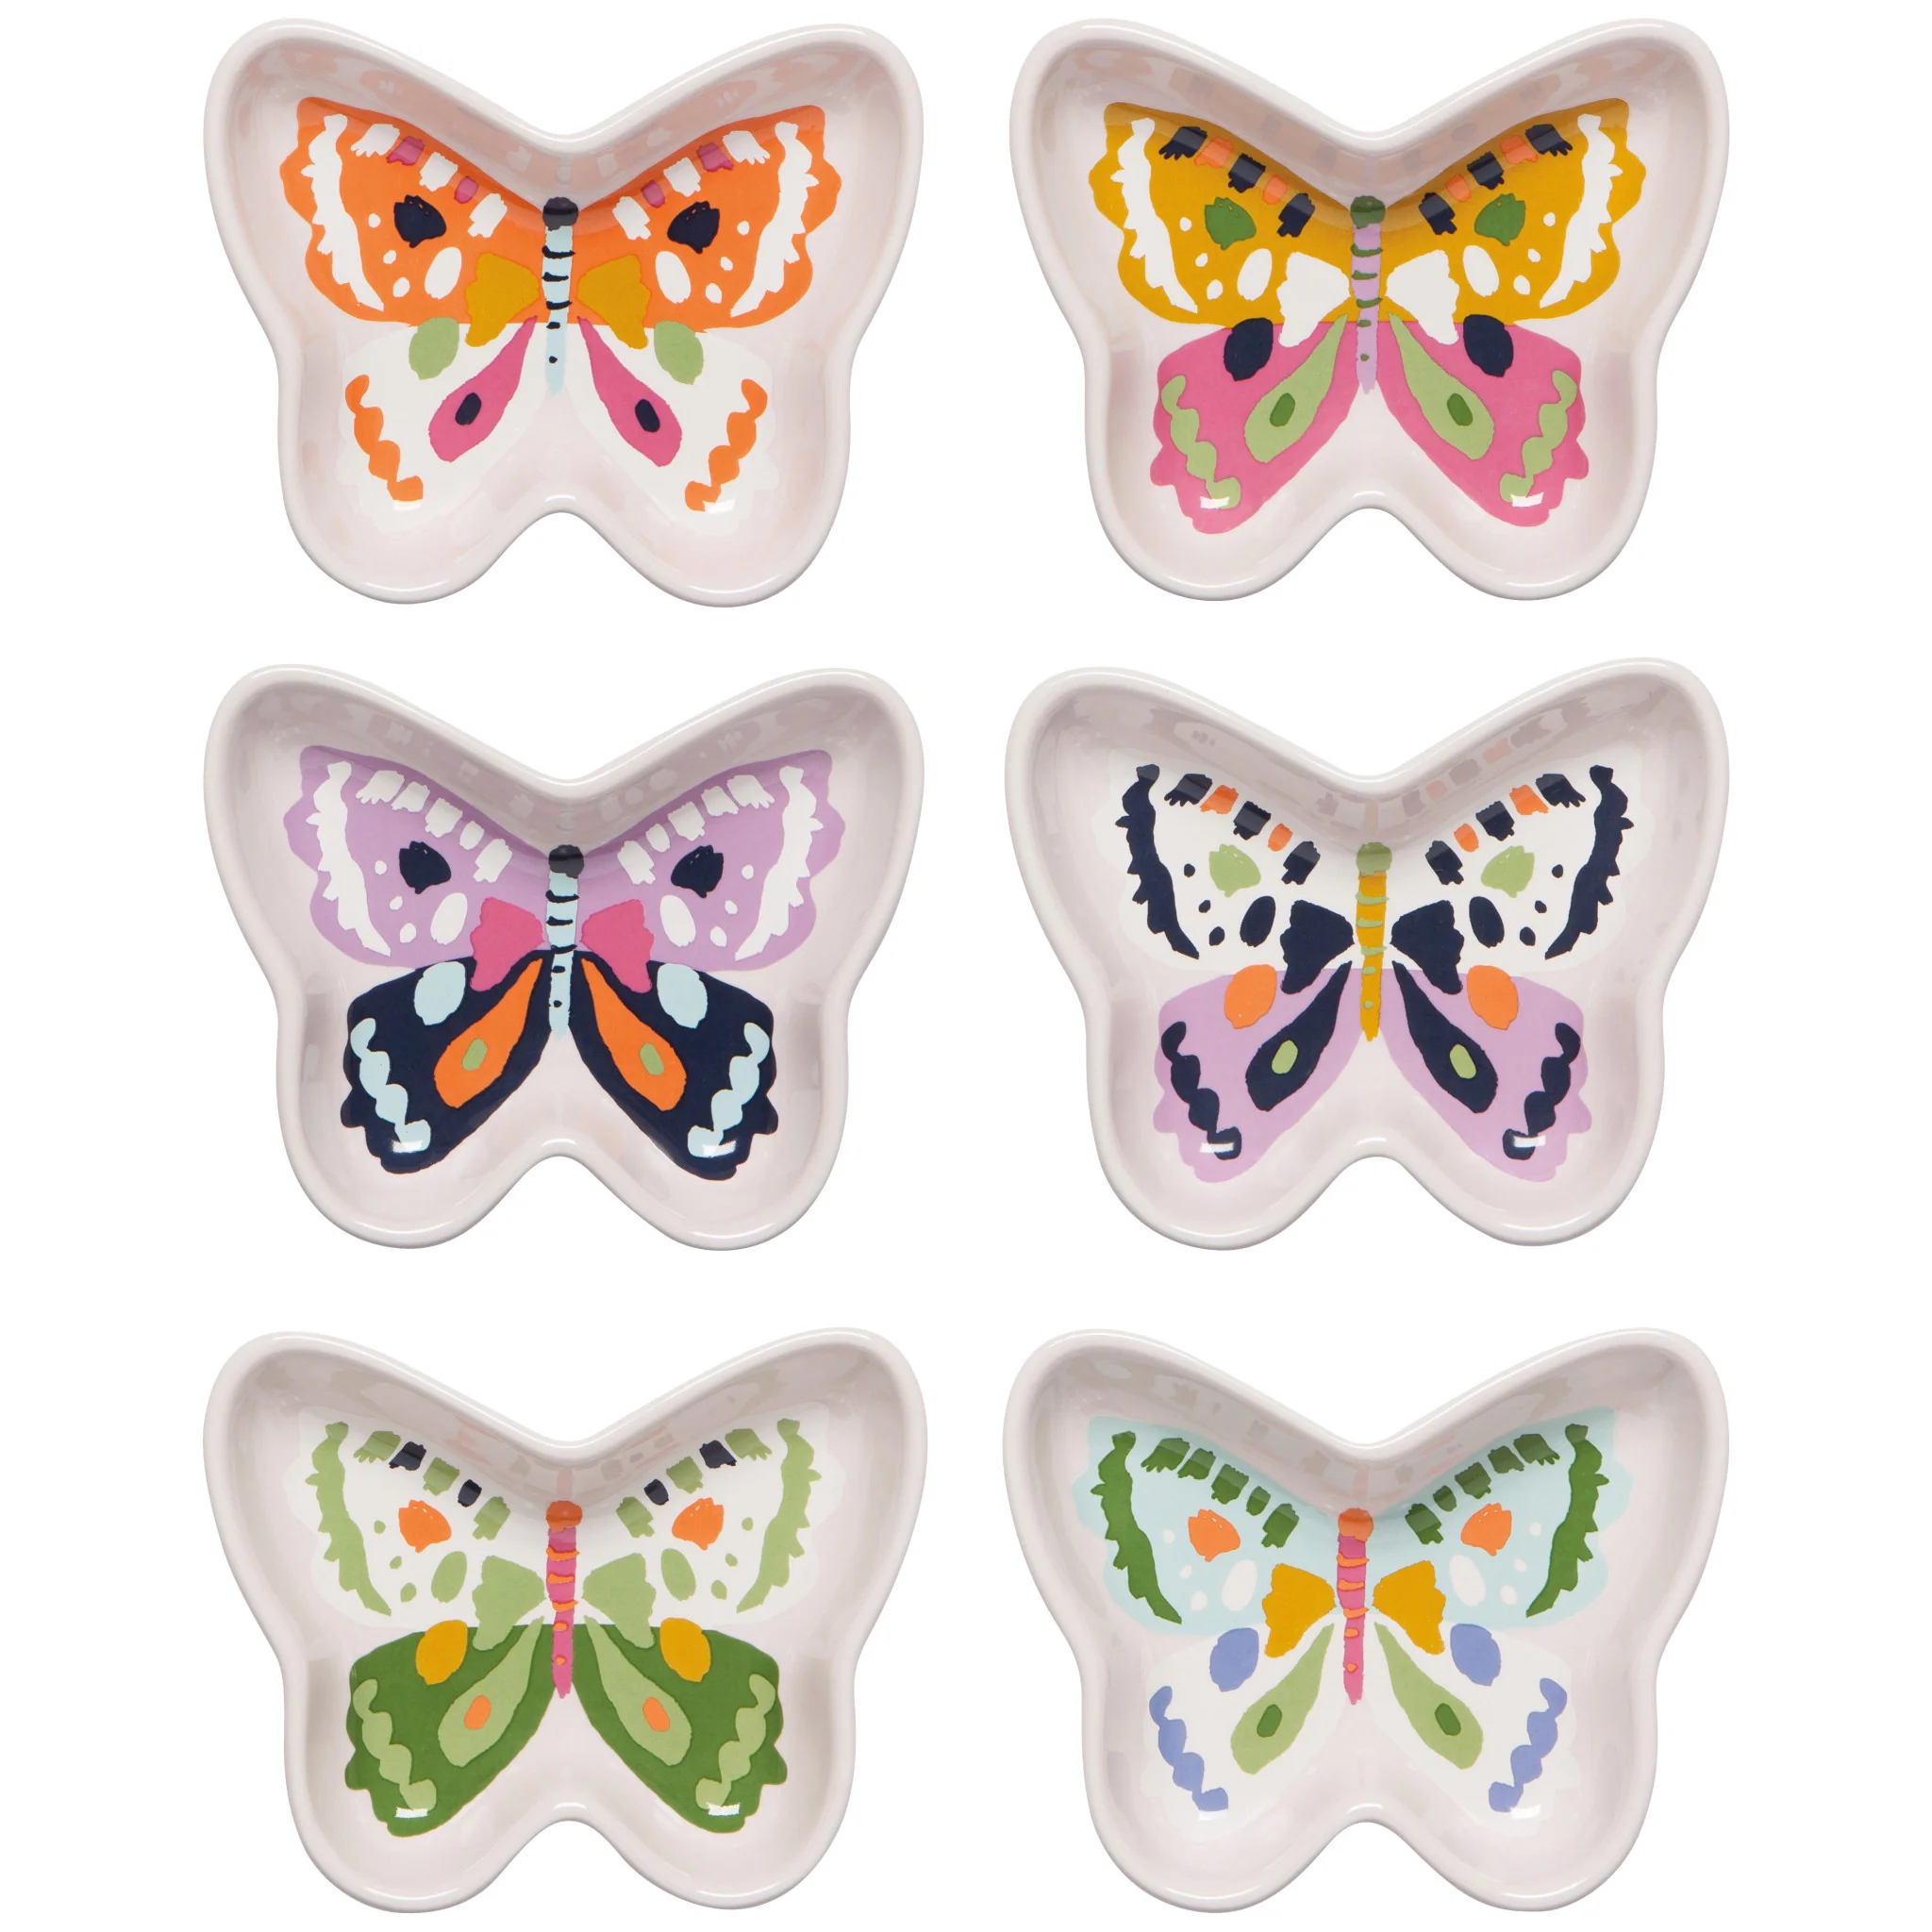 Butterfly-Shaped Pinch Bowl Set - Montessori Services